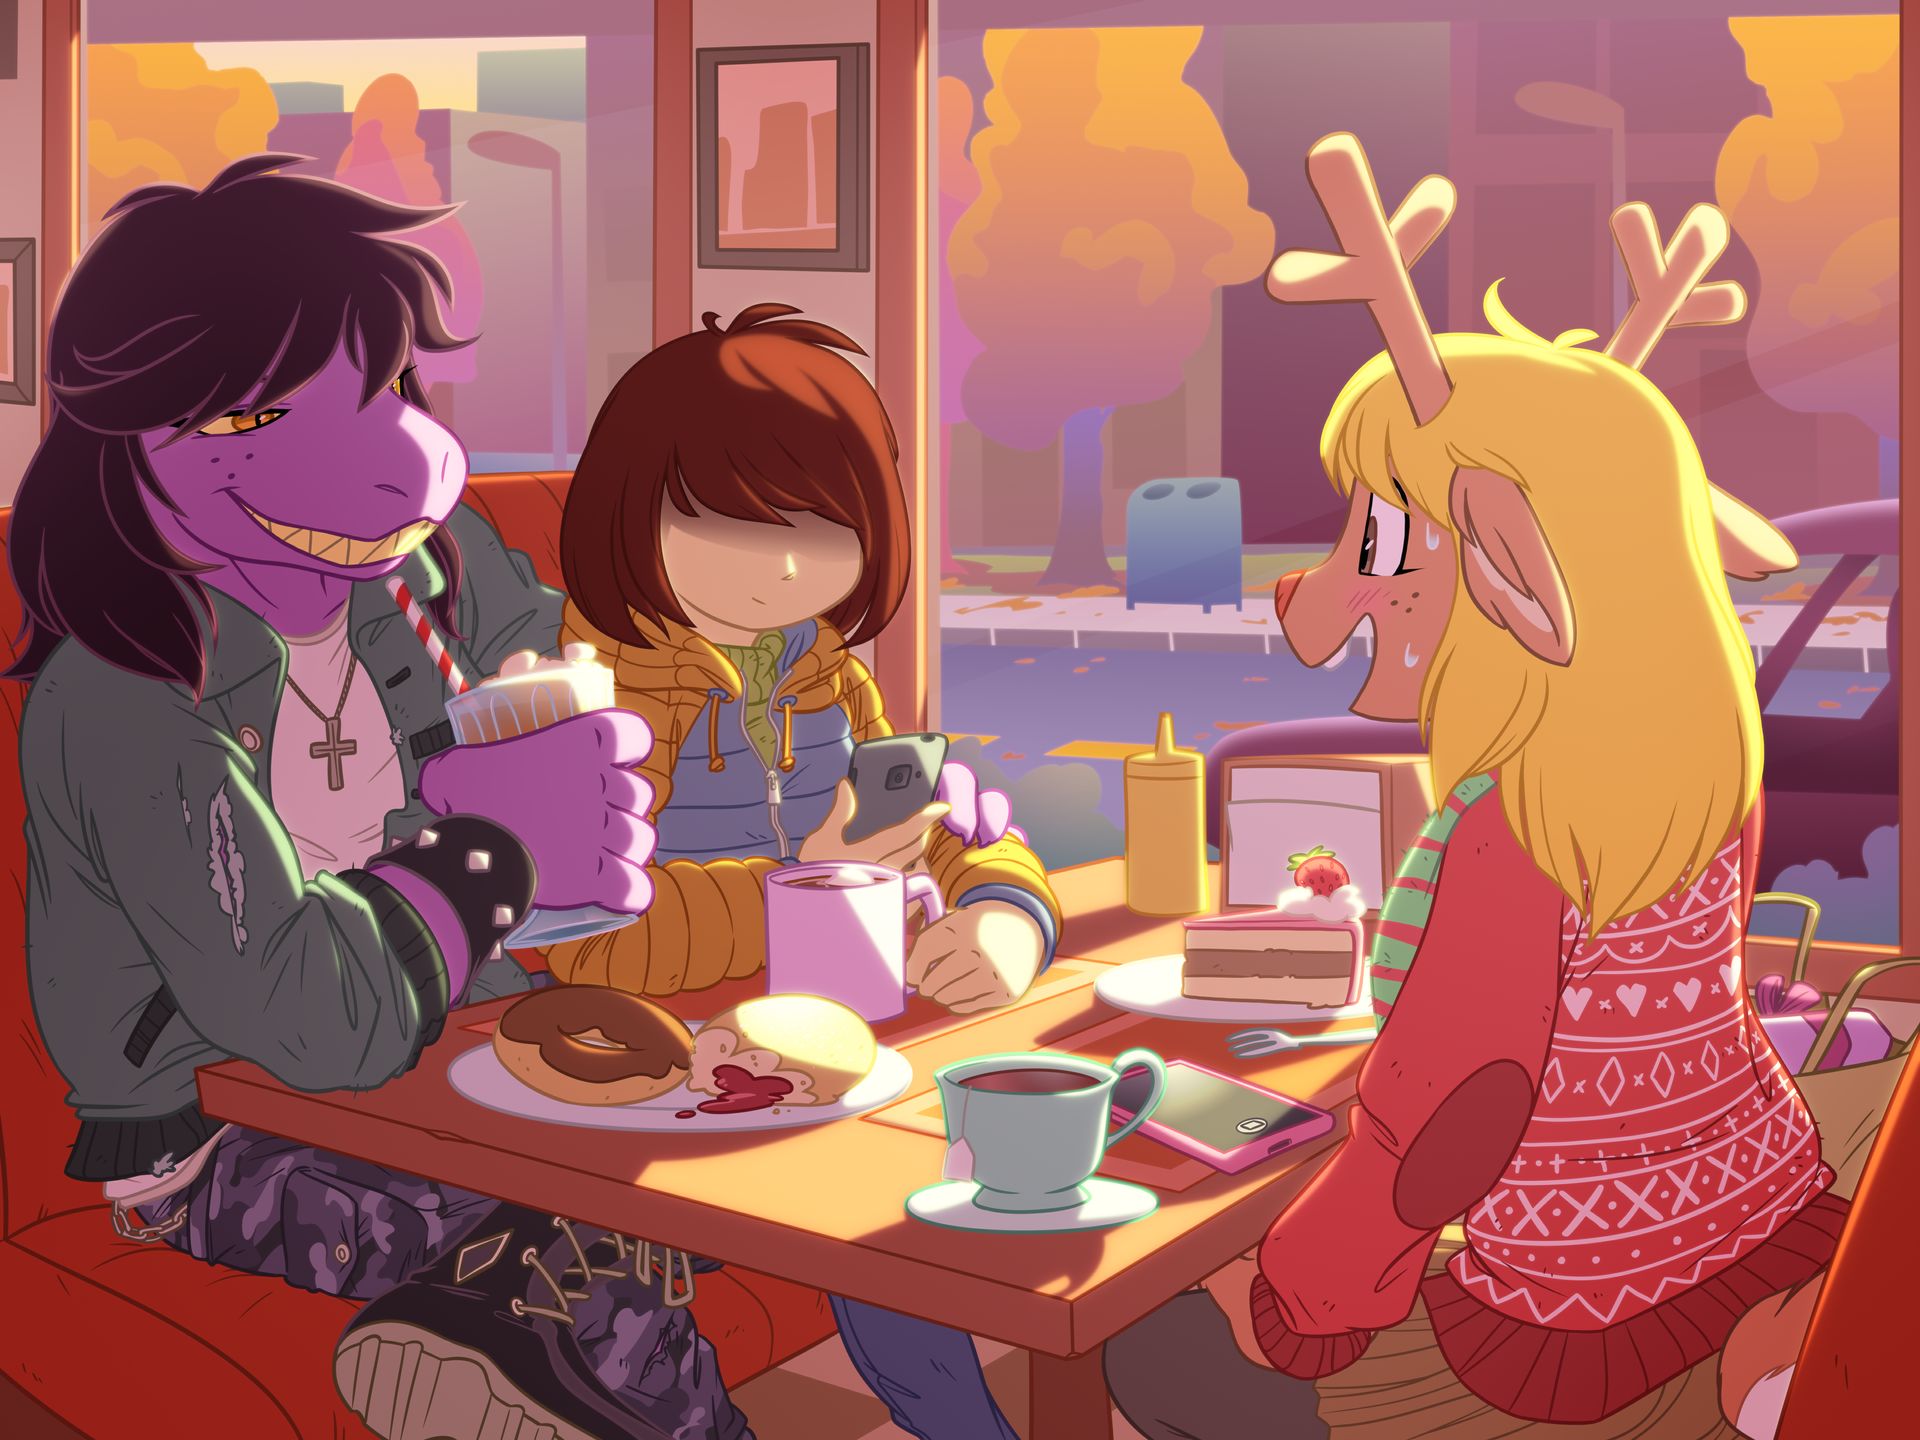 Deltarune picture and jokes / funny picture & best jokes: comics, image, video, humor, gif animation lol'd